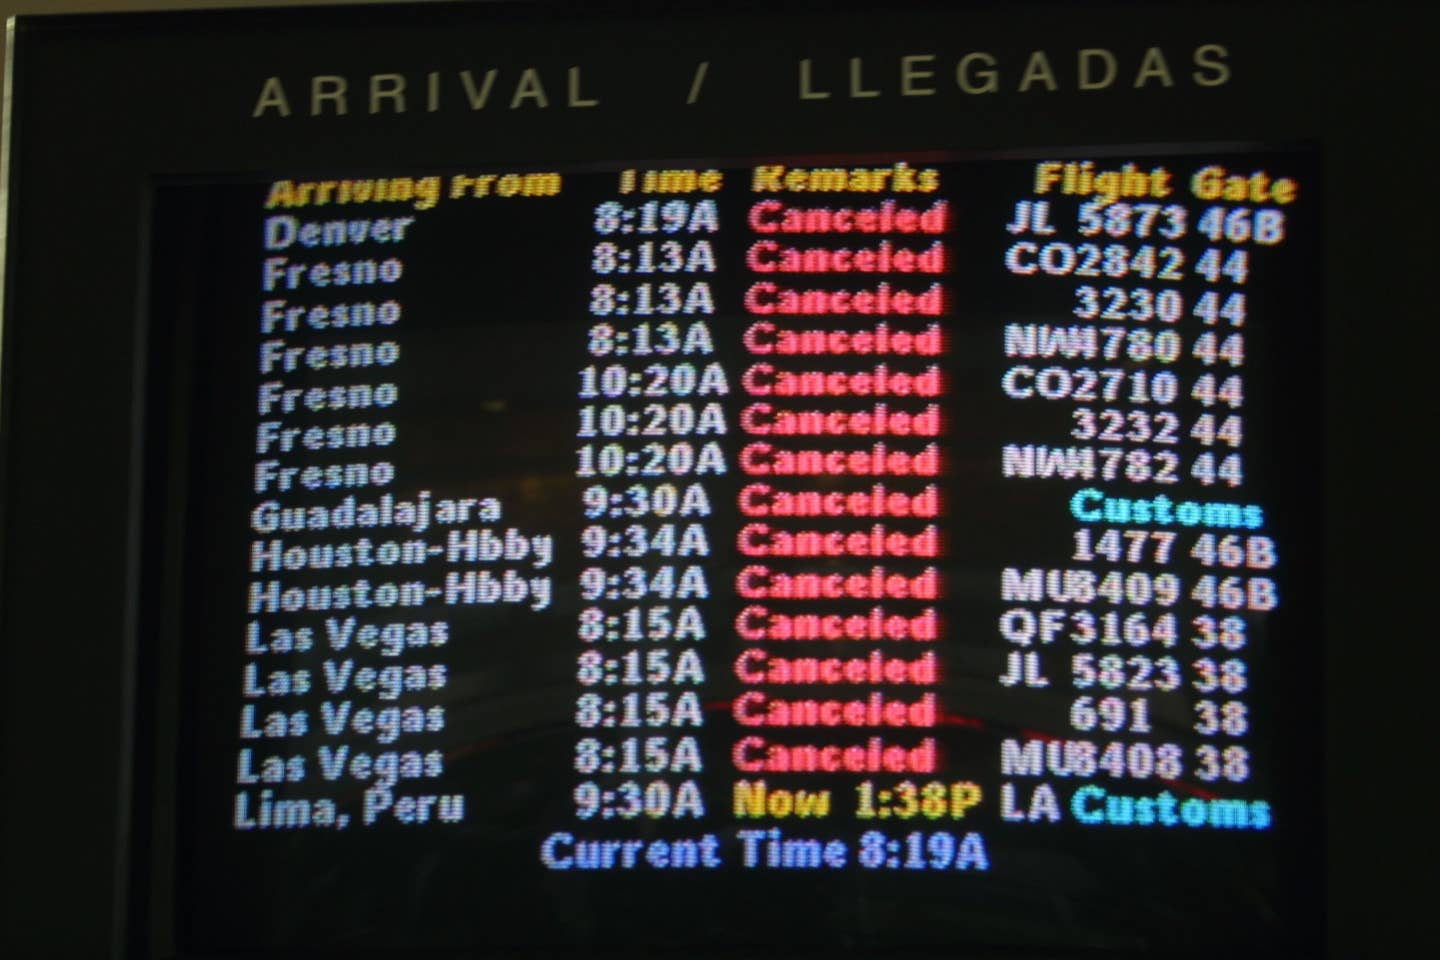 Canceled flights are displayed on monitors at the Los Angeles Airport terminal on September 10, 2001, in Los Angeles, Calif. The airport was closed after two planes bound for Los Angeles hit New York City's World Trade Center. <em>Credit: Photo by Jason Kirk/Getty Images</em>